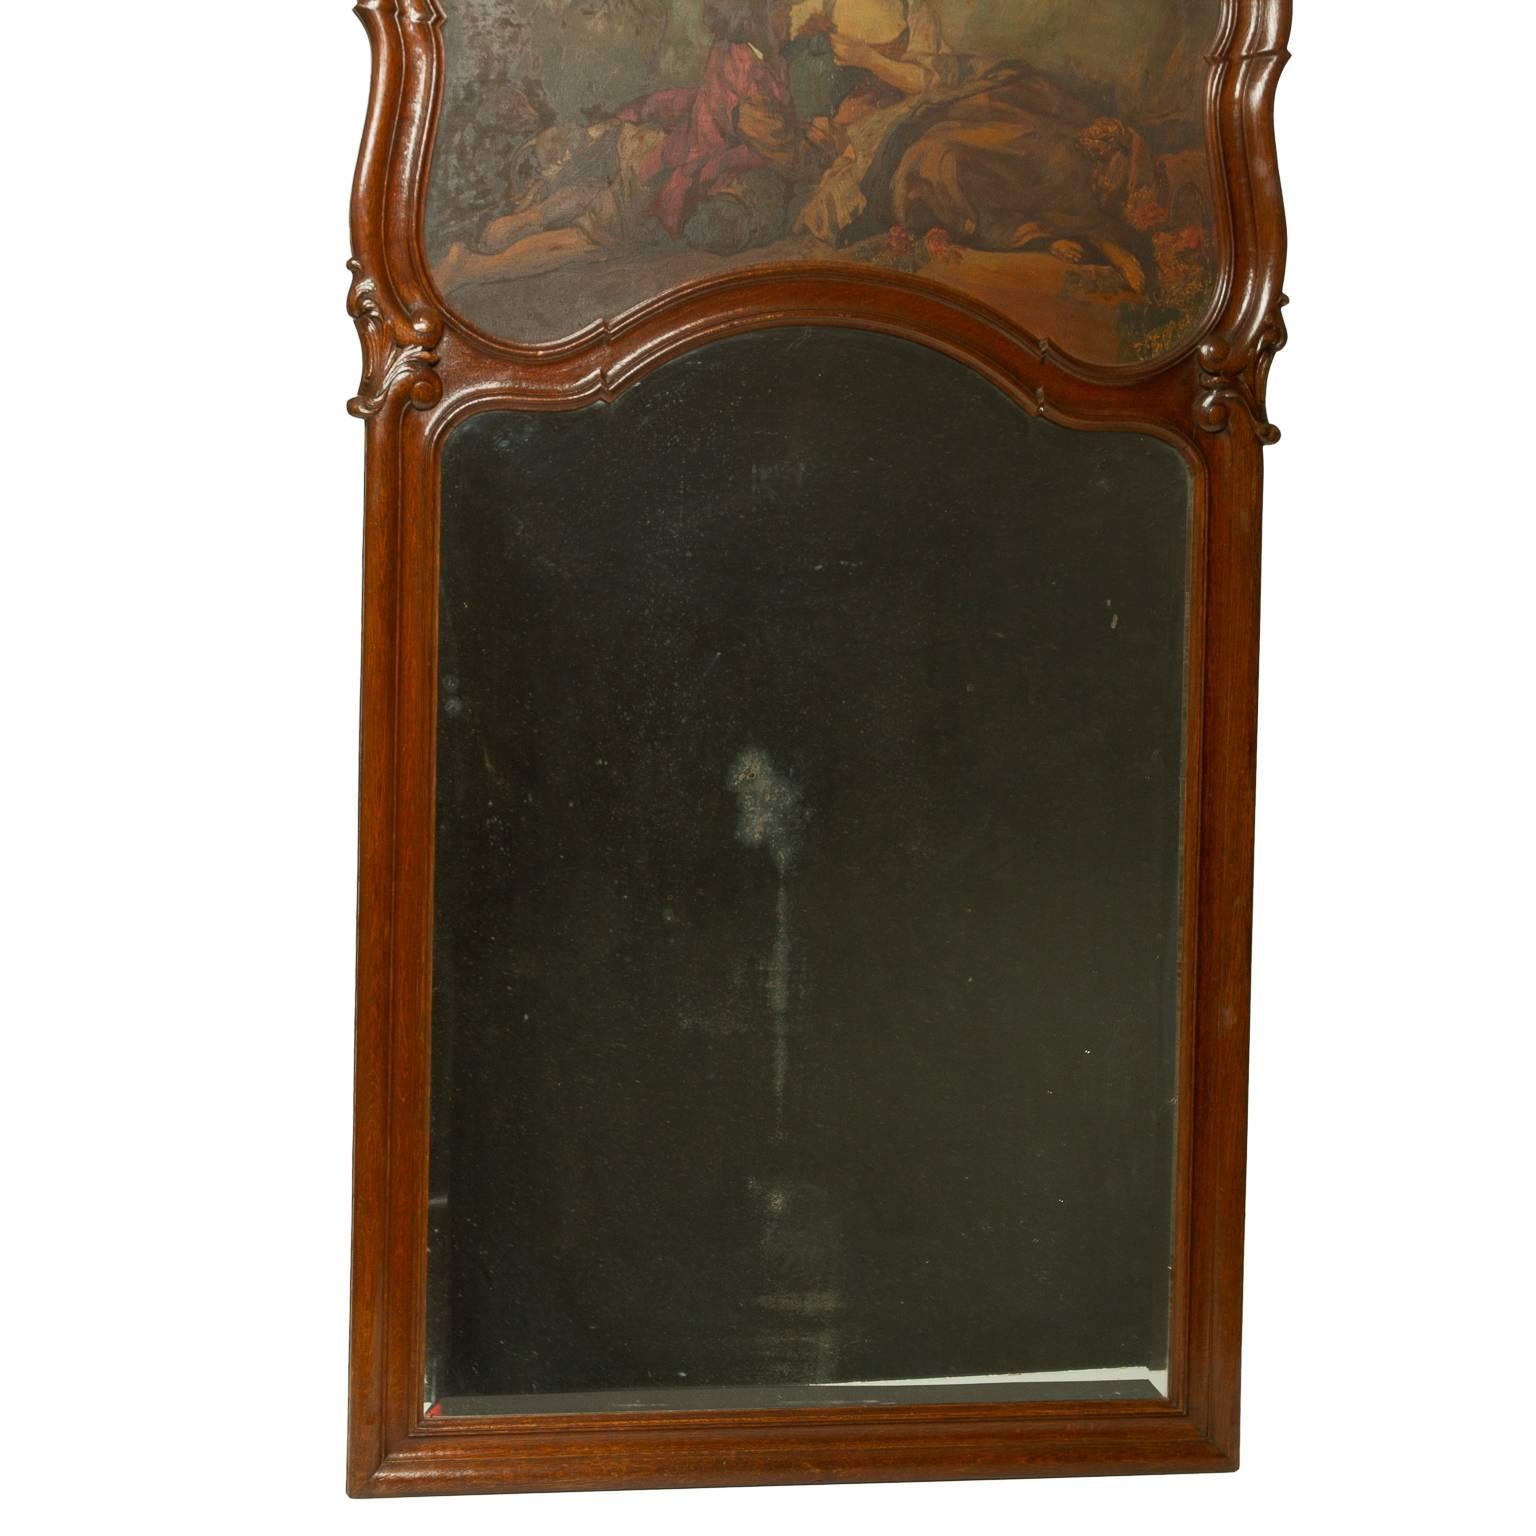 A superb Louis XV style French oak trumeau mirror. The oil on canvas painting of a couple in a garden is surrounded by a shaped frame leading to an elaborate crest which has a shell carving surrounded by floral and leaf carvings. There is a bevelled